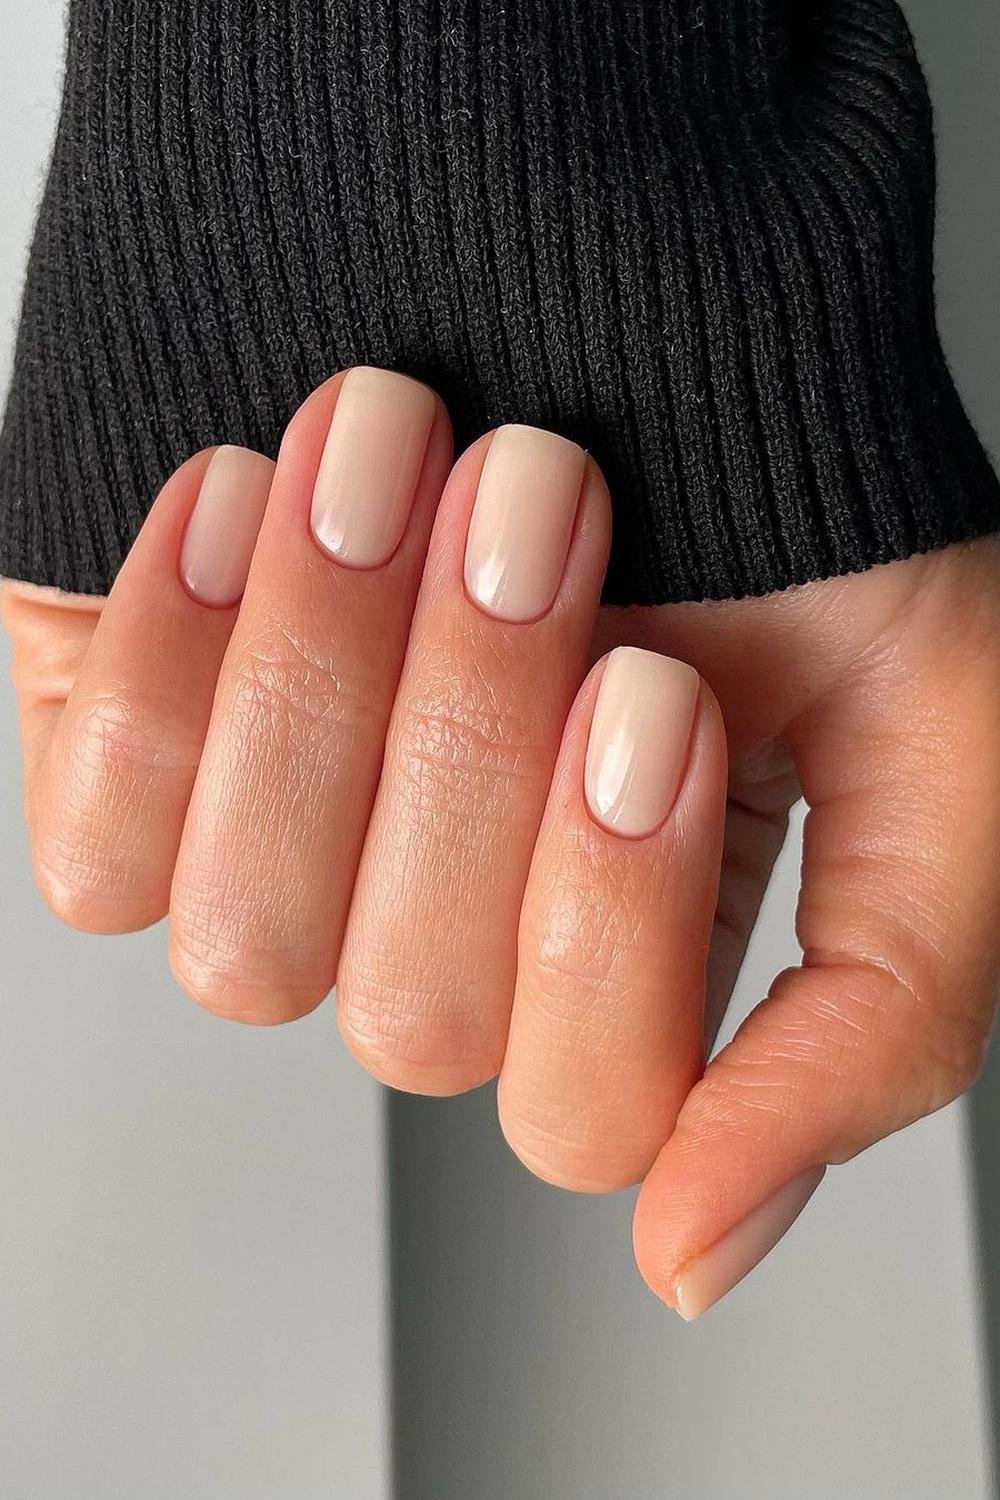 2 - Picture of Nude Nails